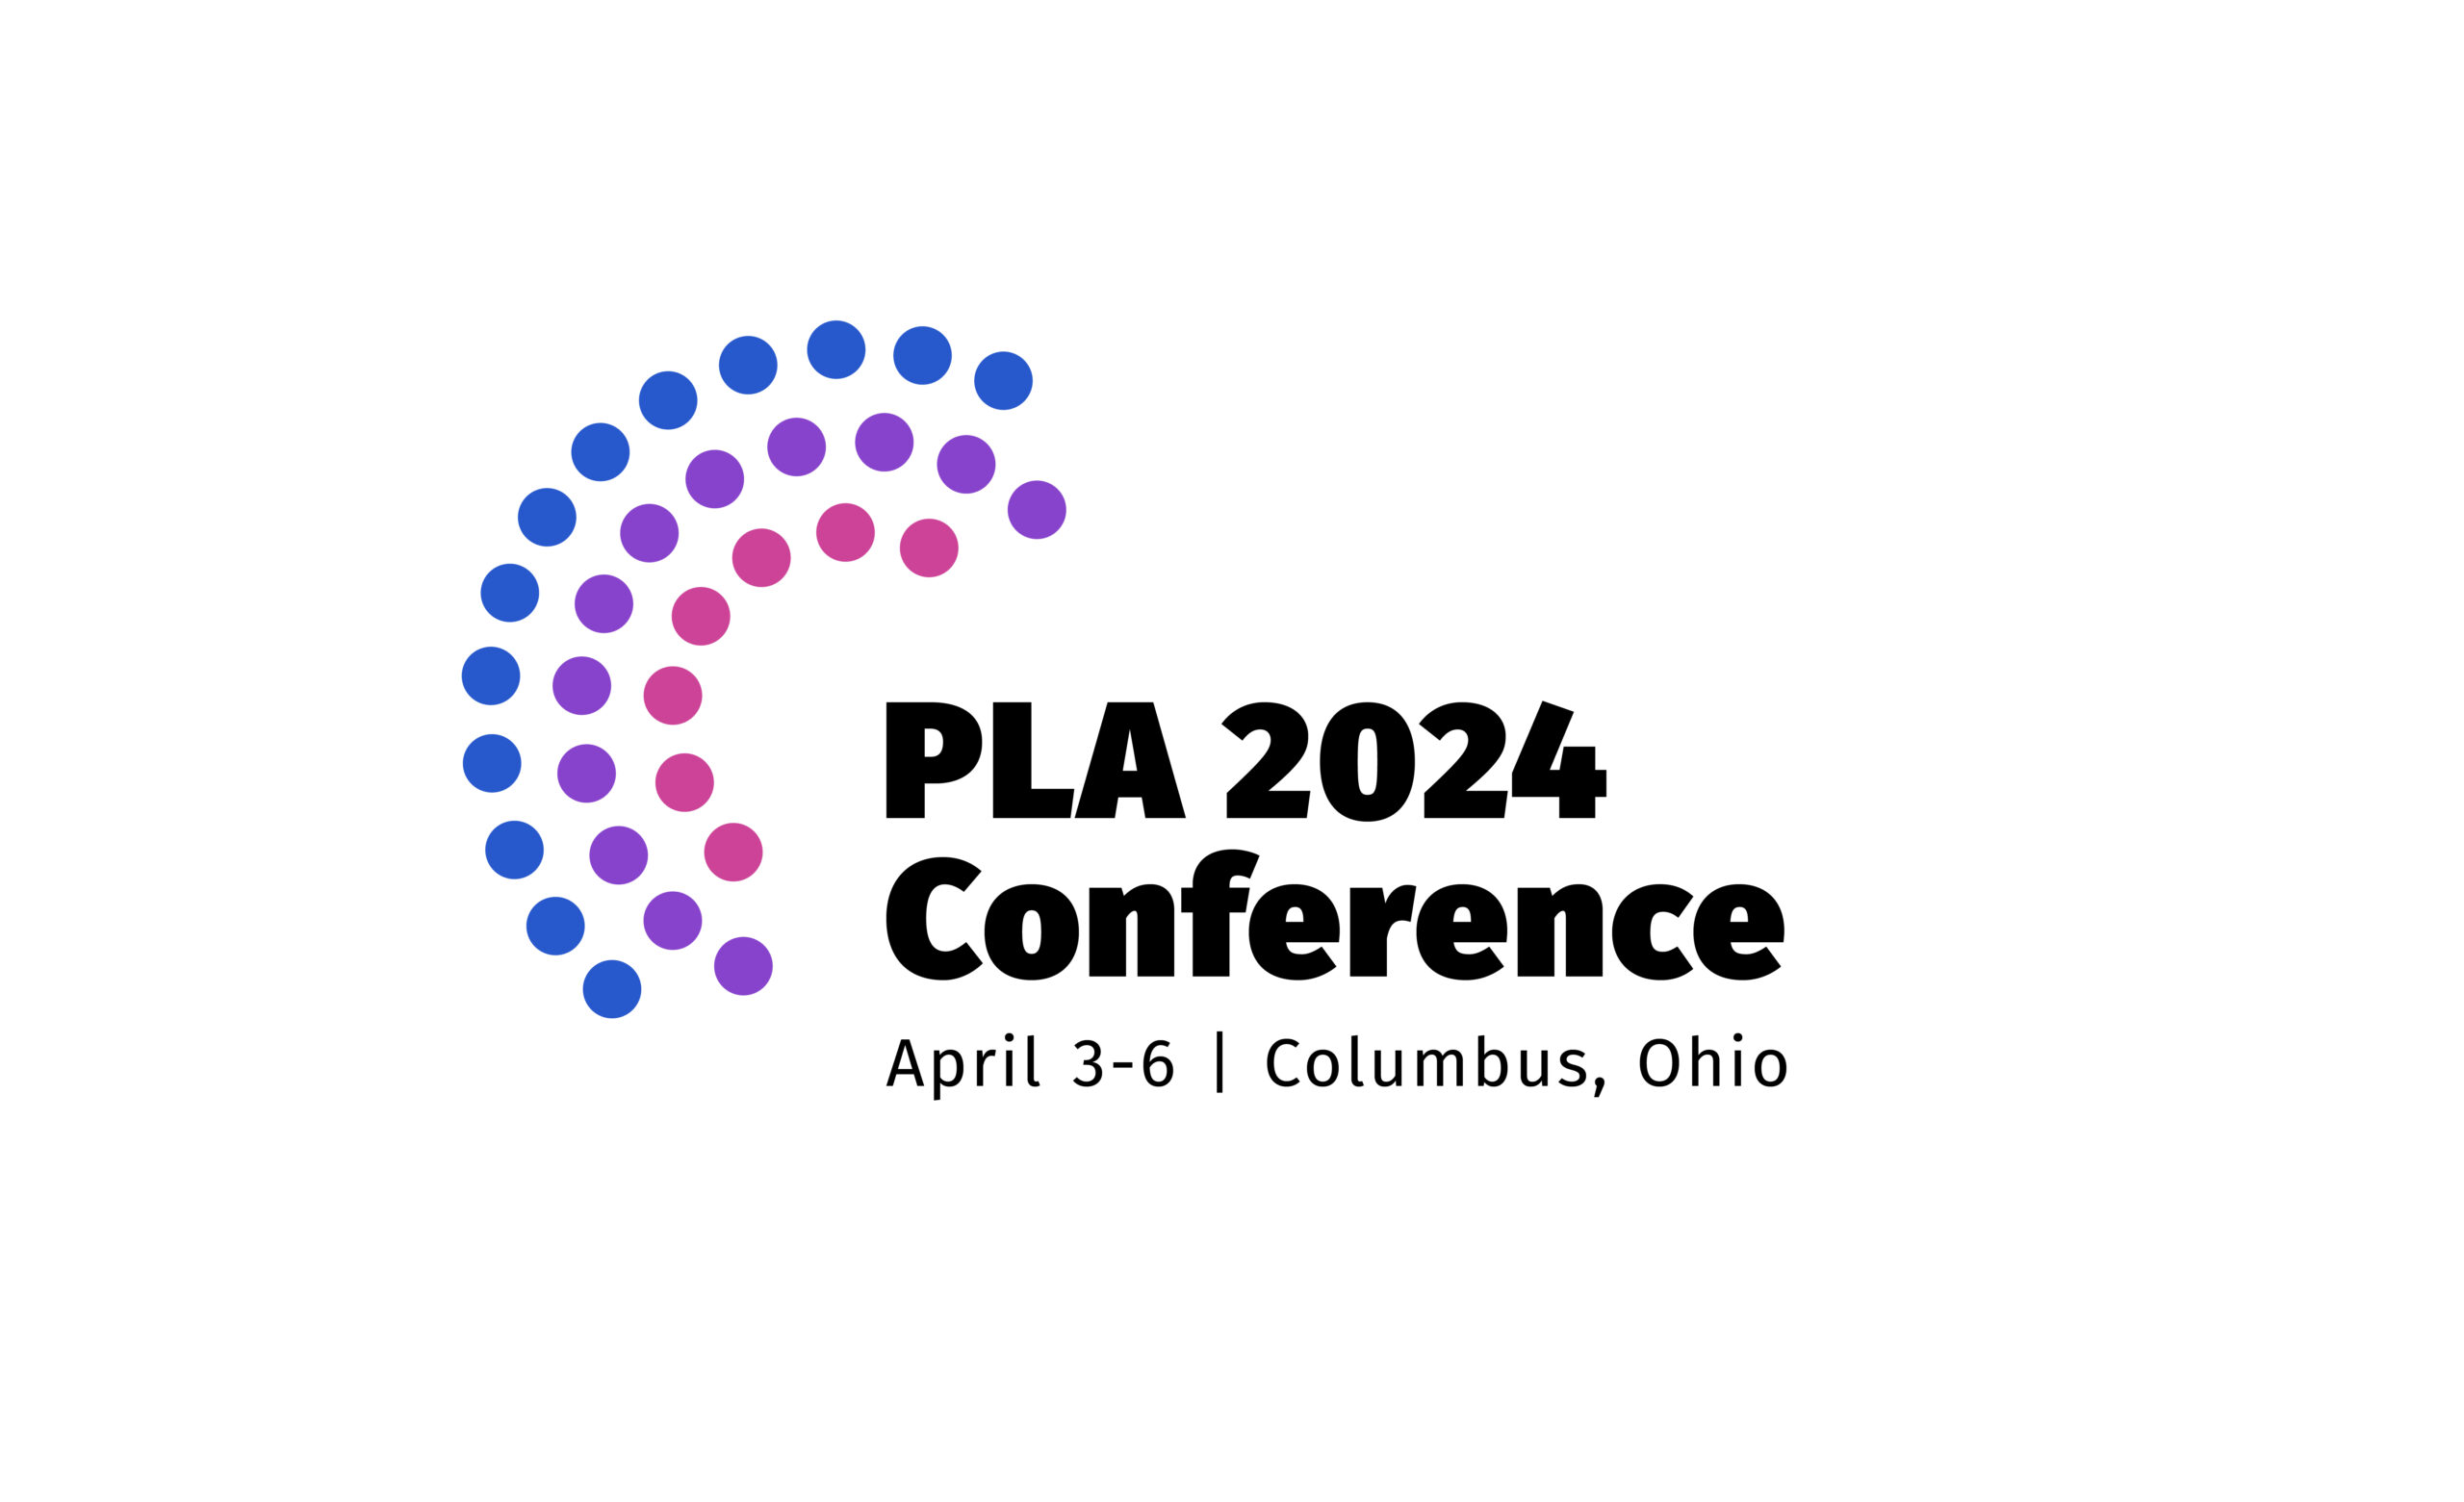 Three half circles spooned inside each other first pink, then purple, then blue next to the words pla 2024 conference in black